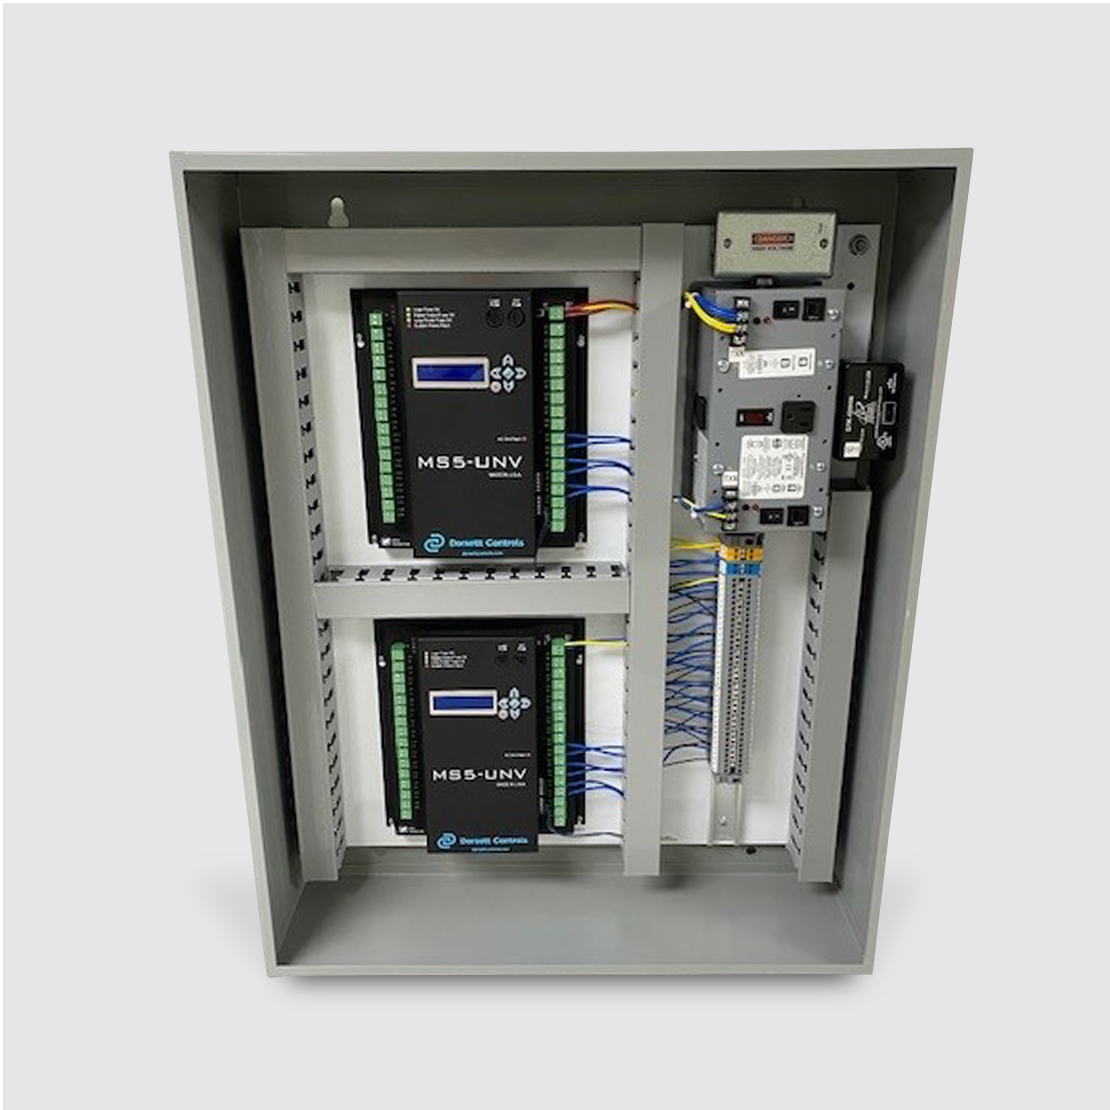 This is Dorsett Control's HVAC and control panel box with two Microscan 5 Universal Controllers